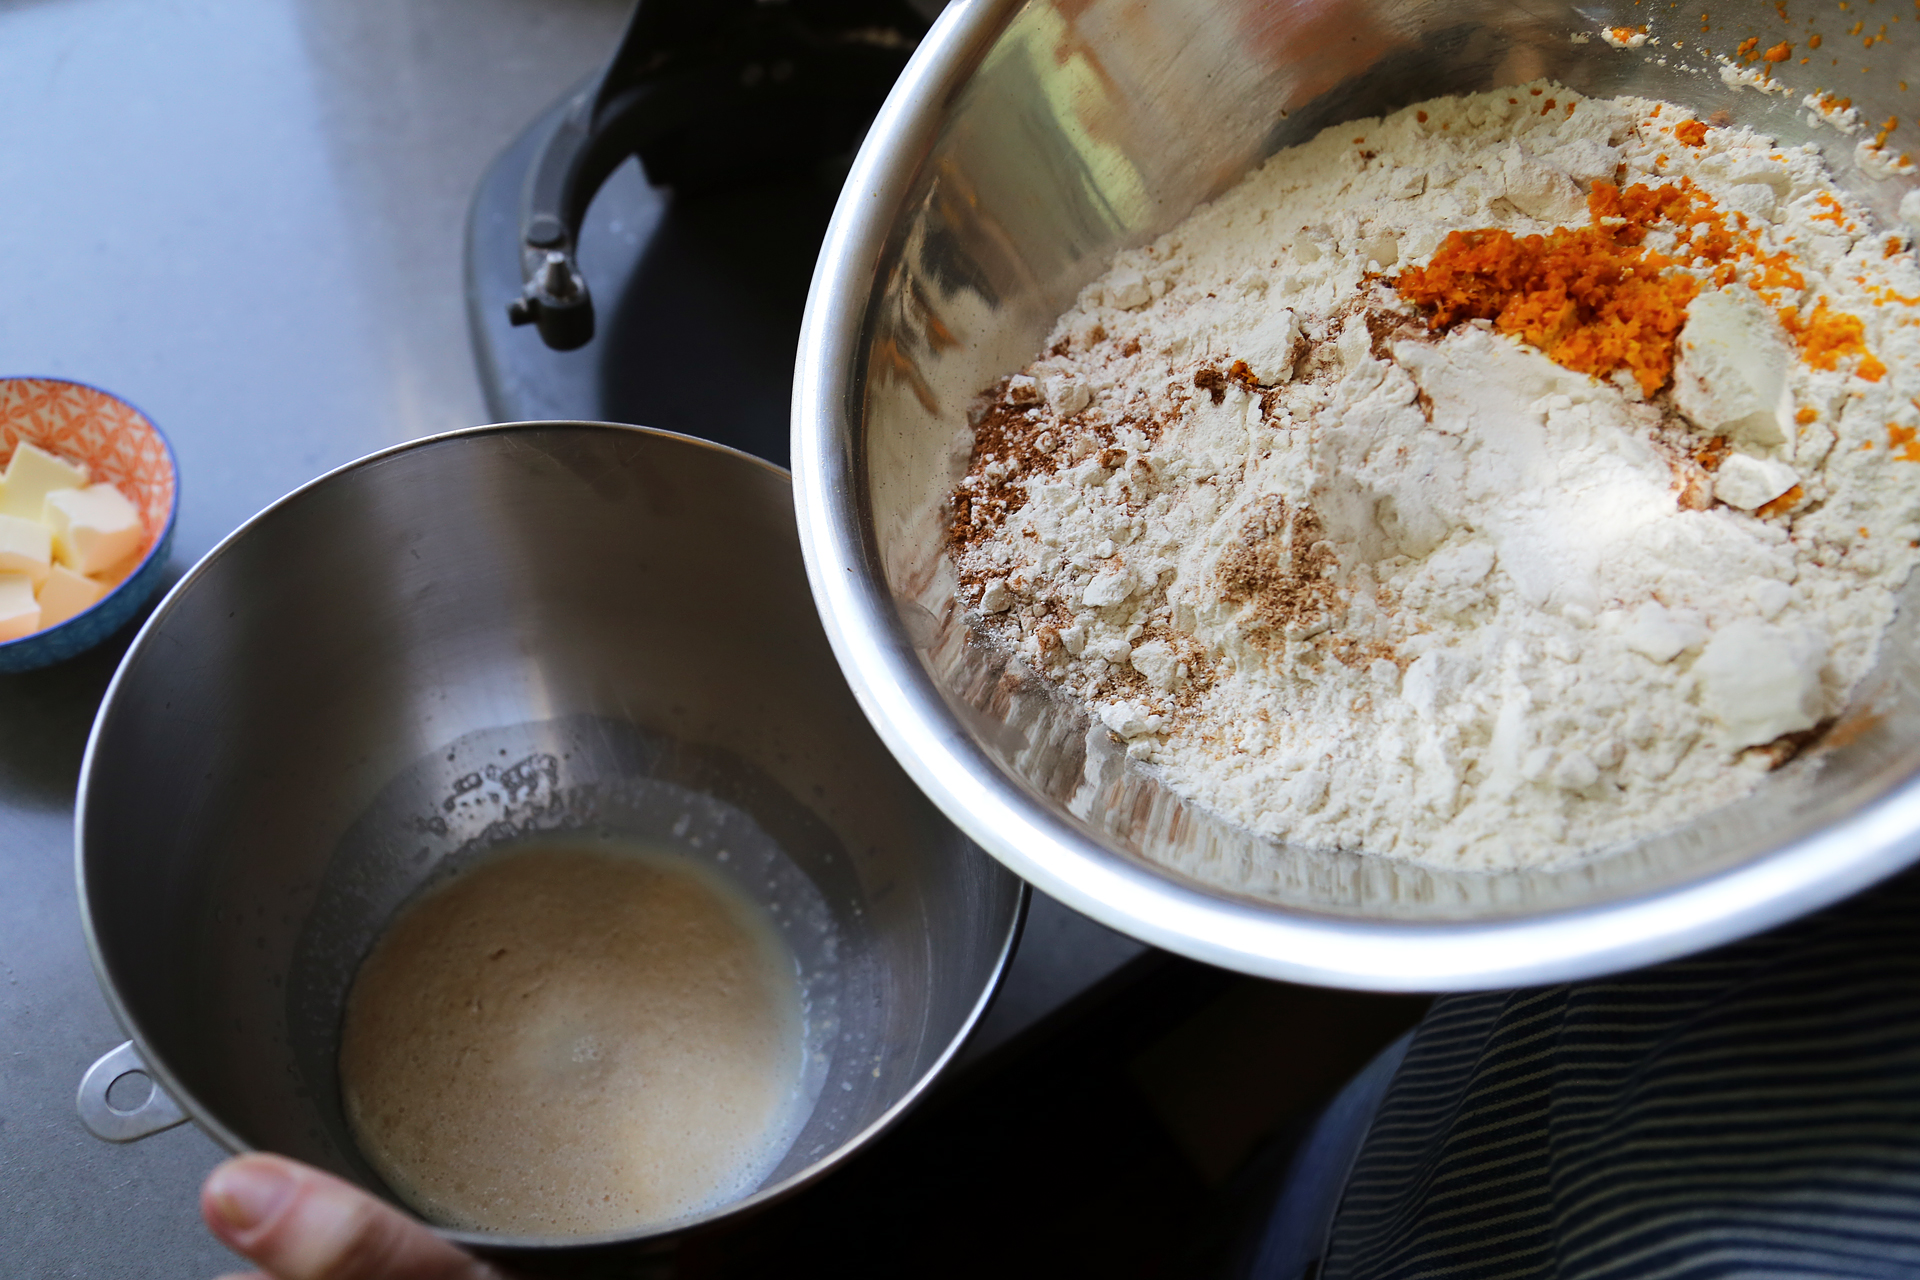 Dissolve the yeast and granulated sugar in the warm milk and let stand until foamy, about 10 minutes. Add the eggs, flour, orange zest, spices, and salt.